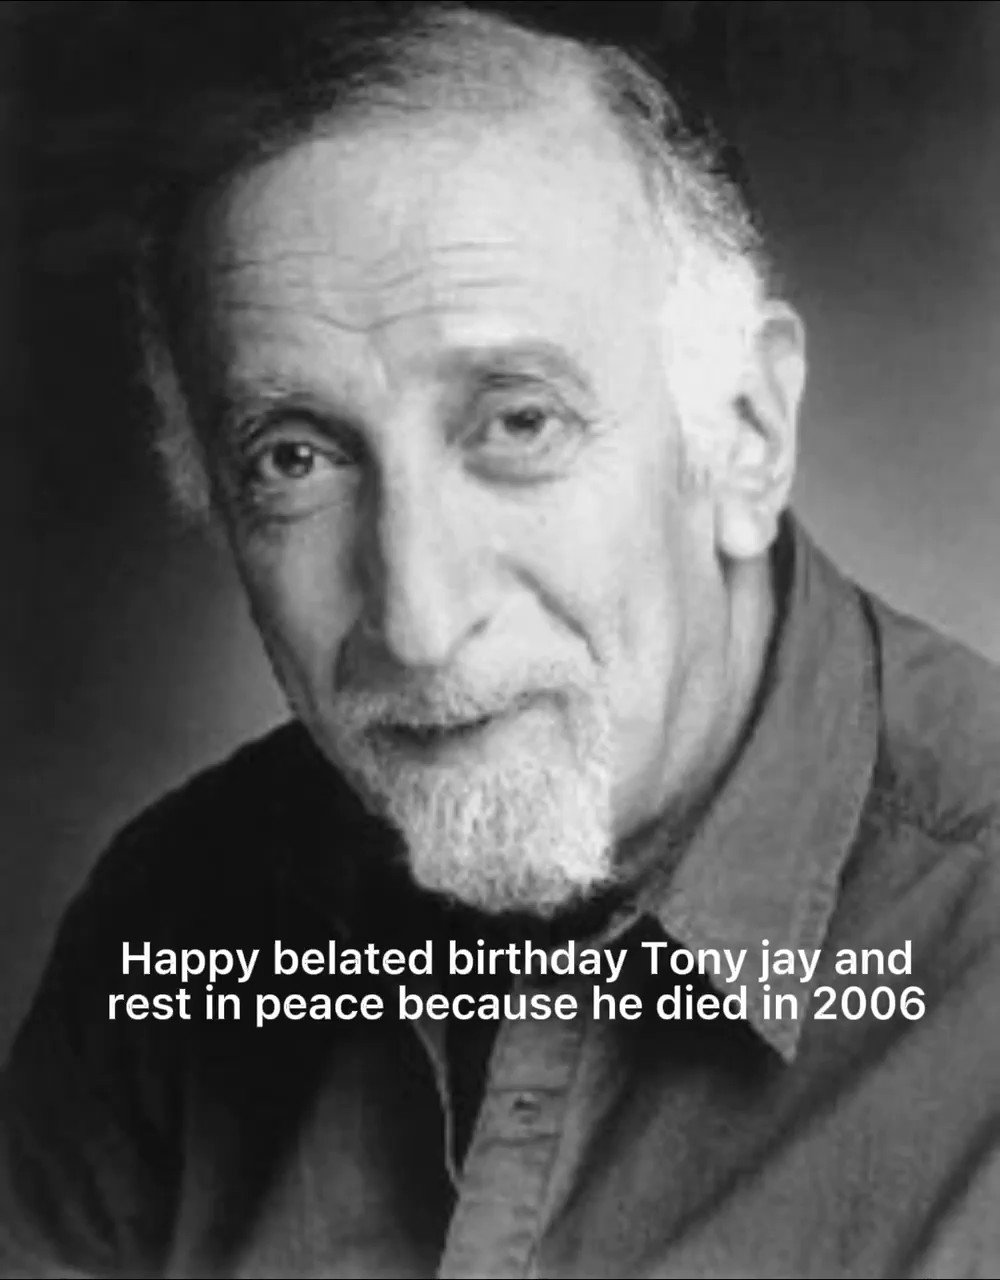  happy belated birthday tony jay and rest in peace 